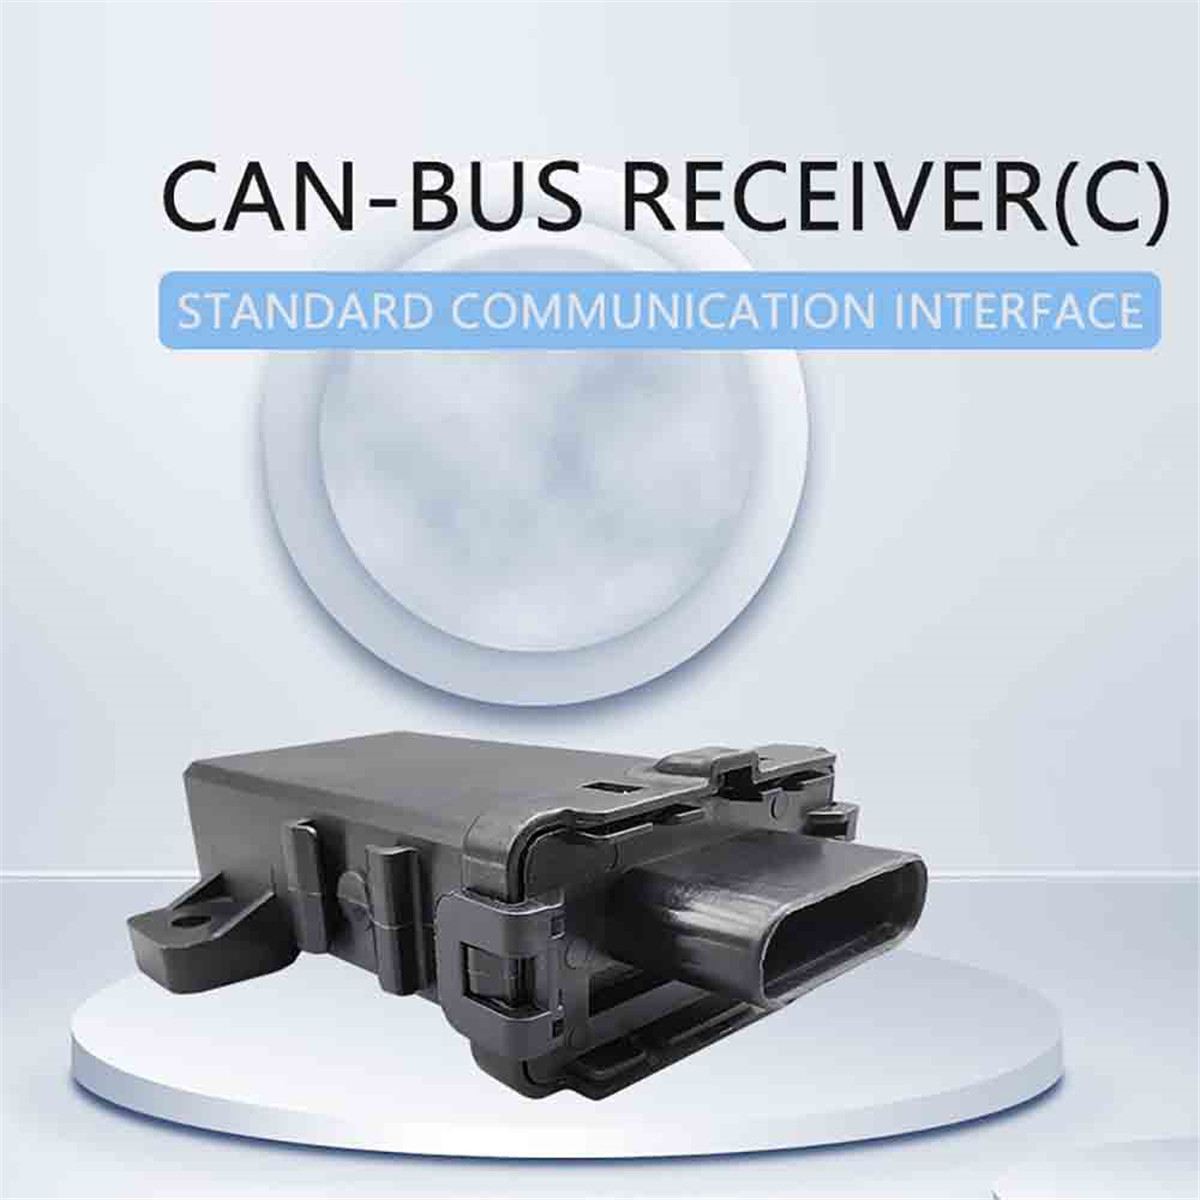 I-CAN-Bus receiver01 (8)